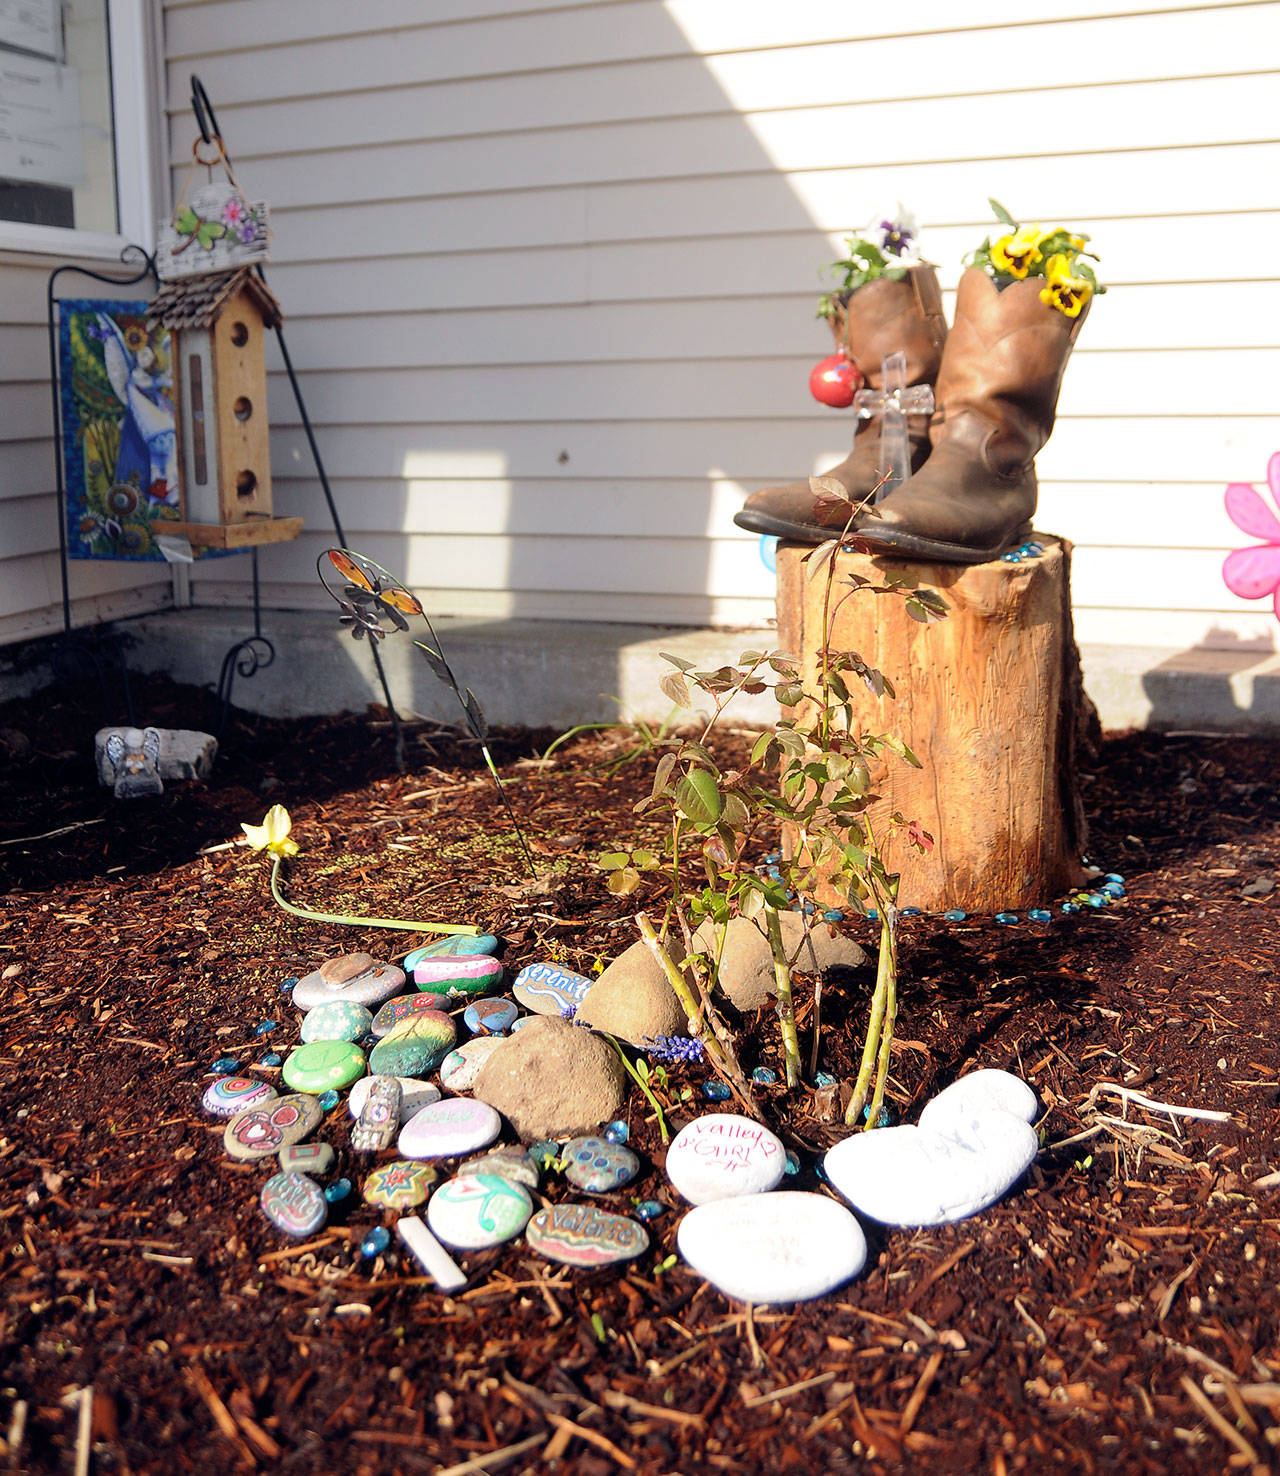 Residents of Sunbelt Apartments in Sequim have erected “Valerie’s Garden” at the South Fifth Avenue facility where Valerie Claplanhoo was killed Jan. 2. (Michael Dashiell/Olympic Peninsula News Group)